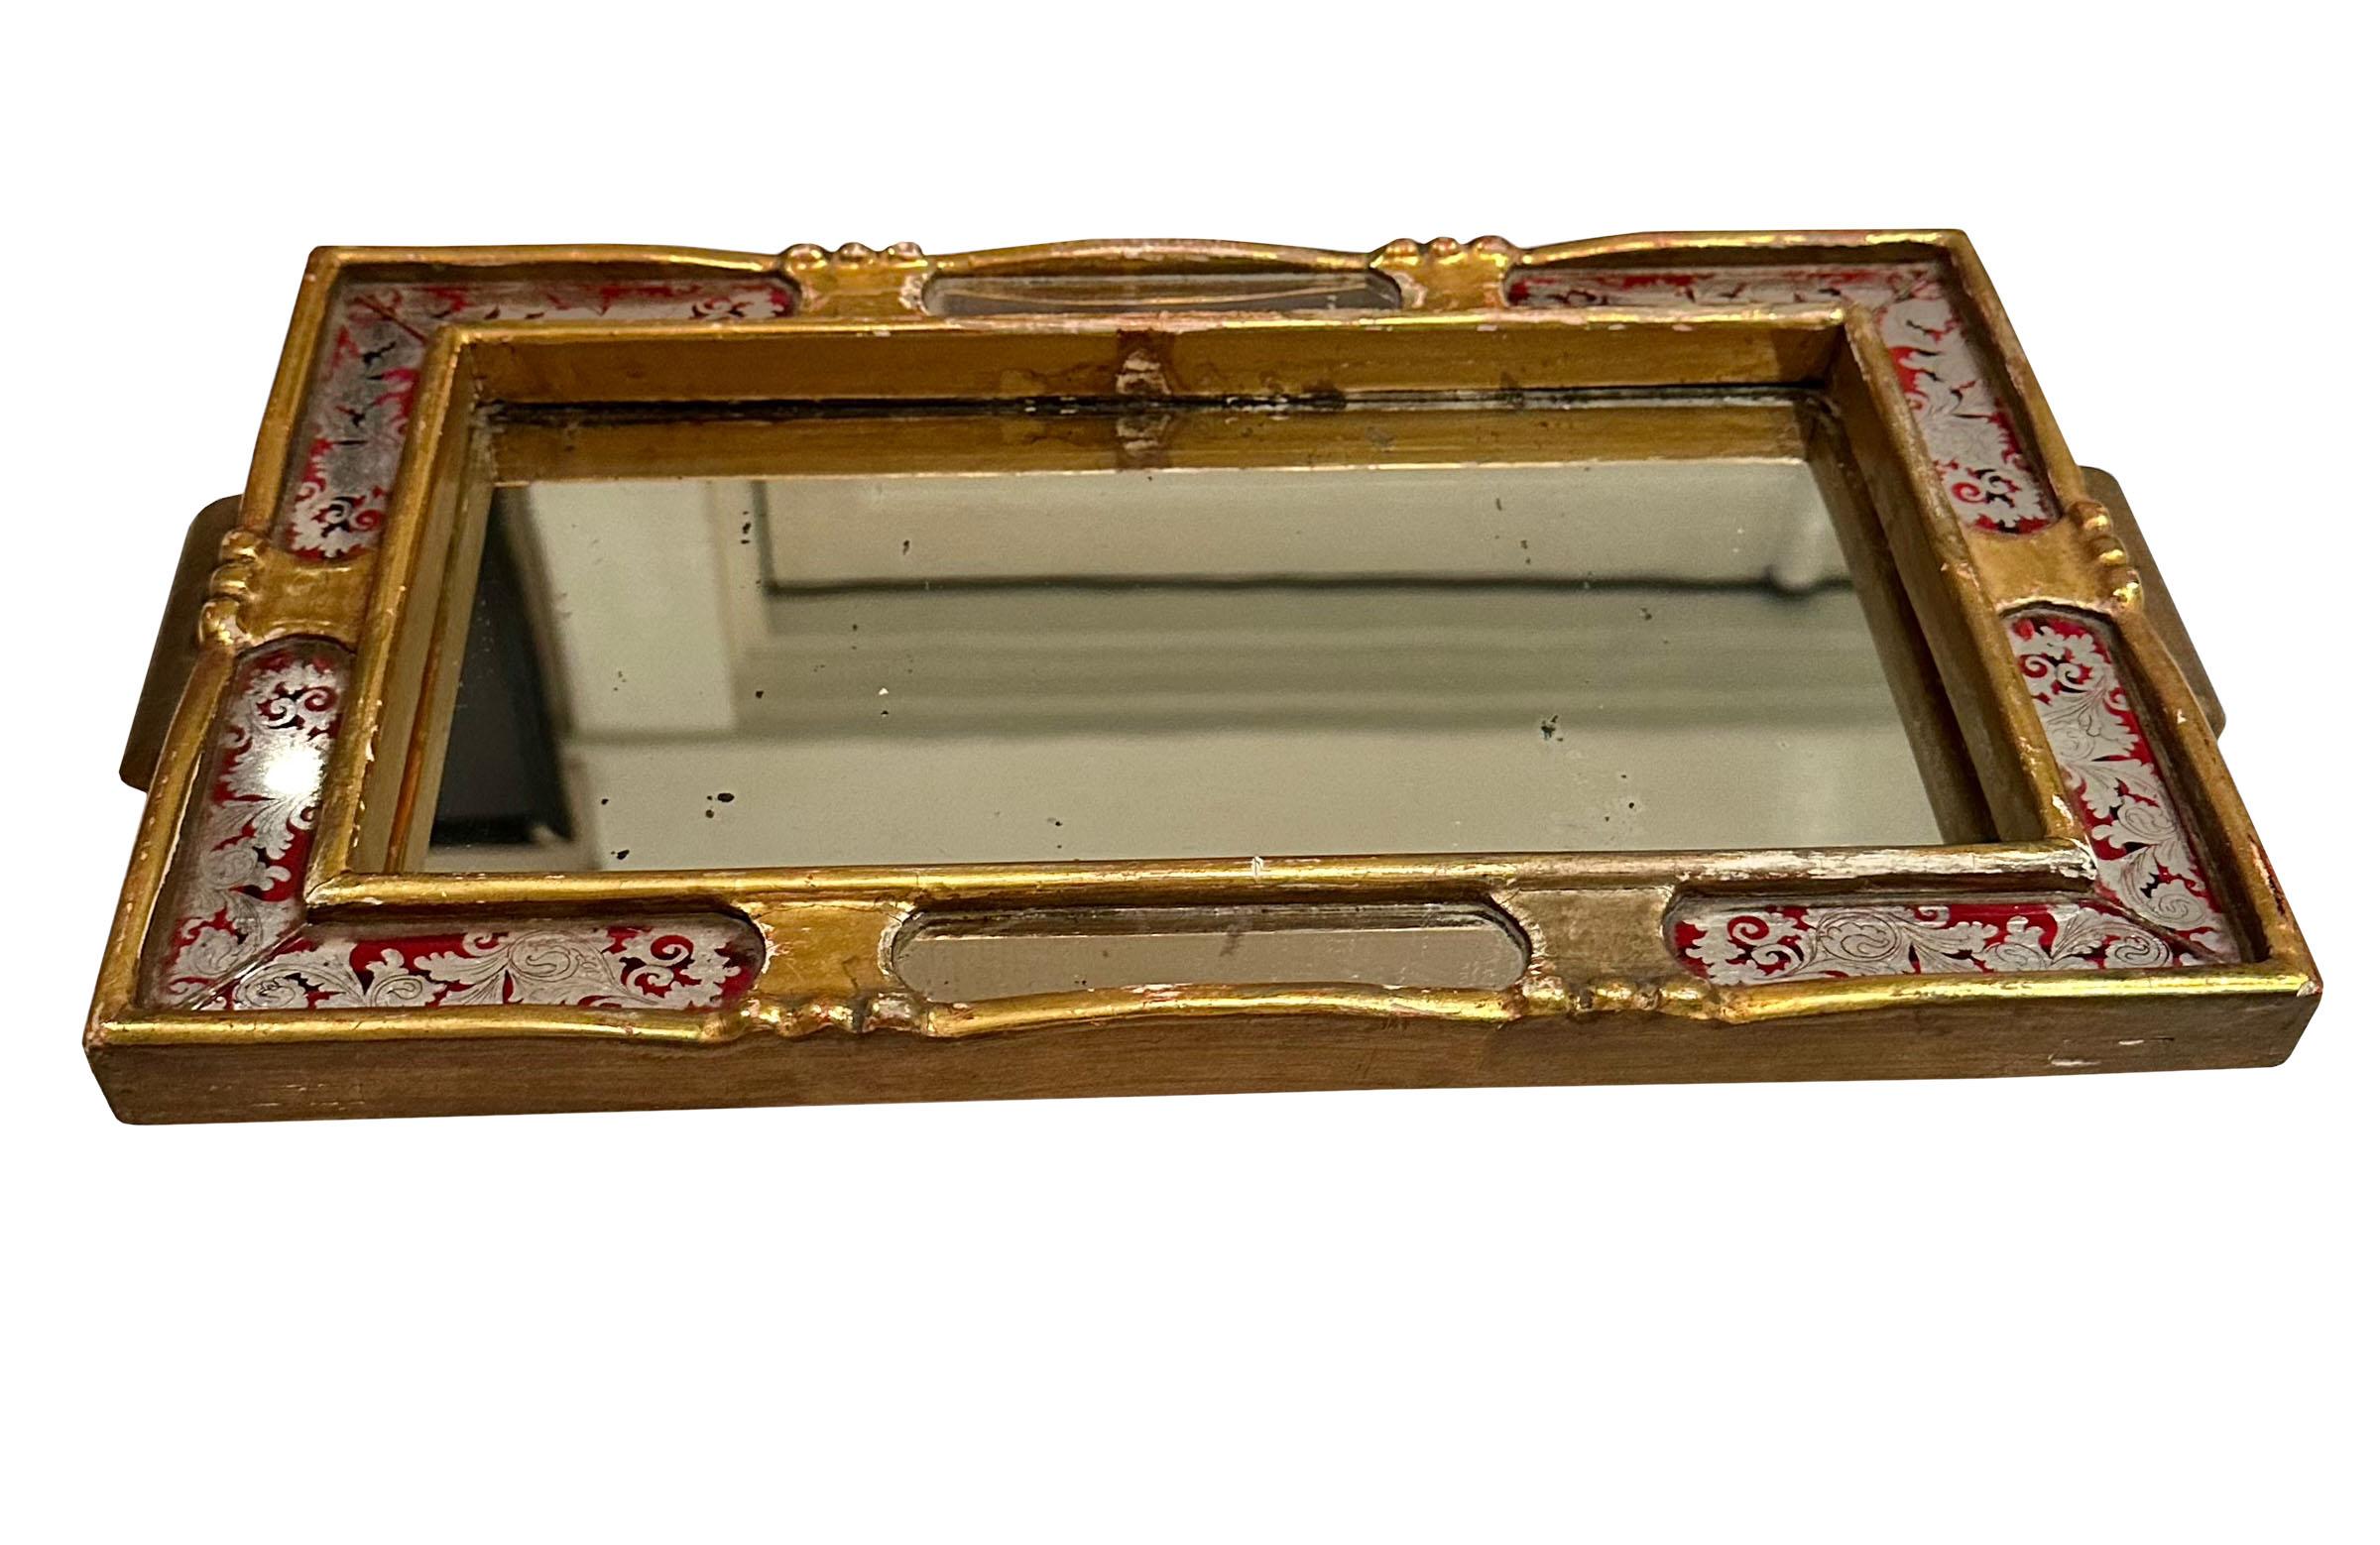 A turn of the century eglomise gold gilt tray from Italy. A perfect serving tray or as a table display.